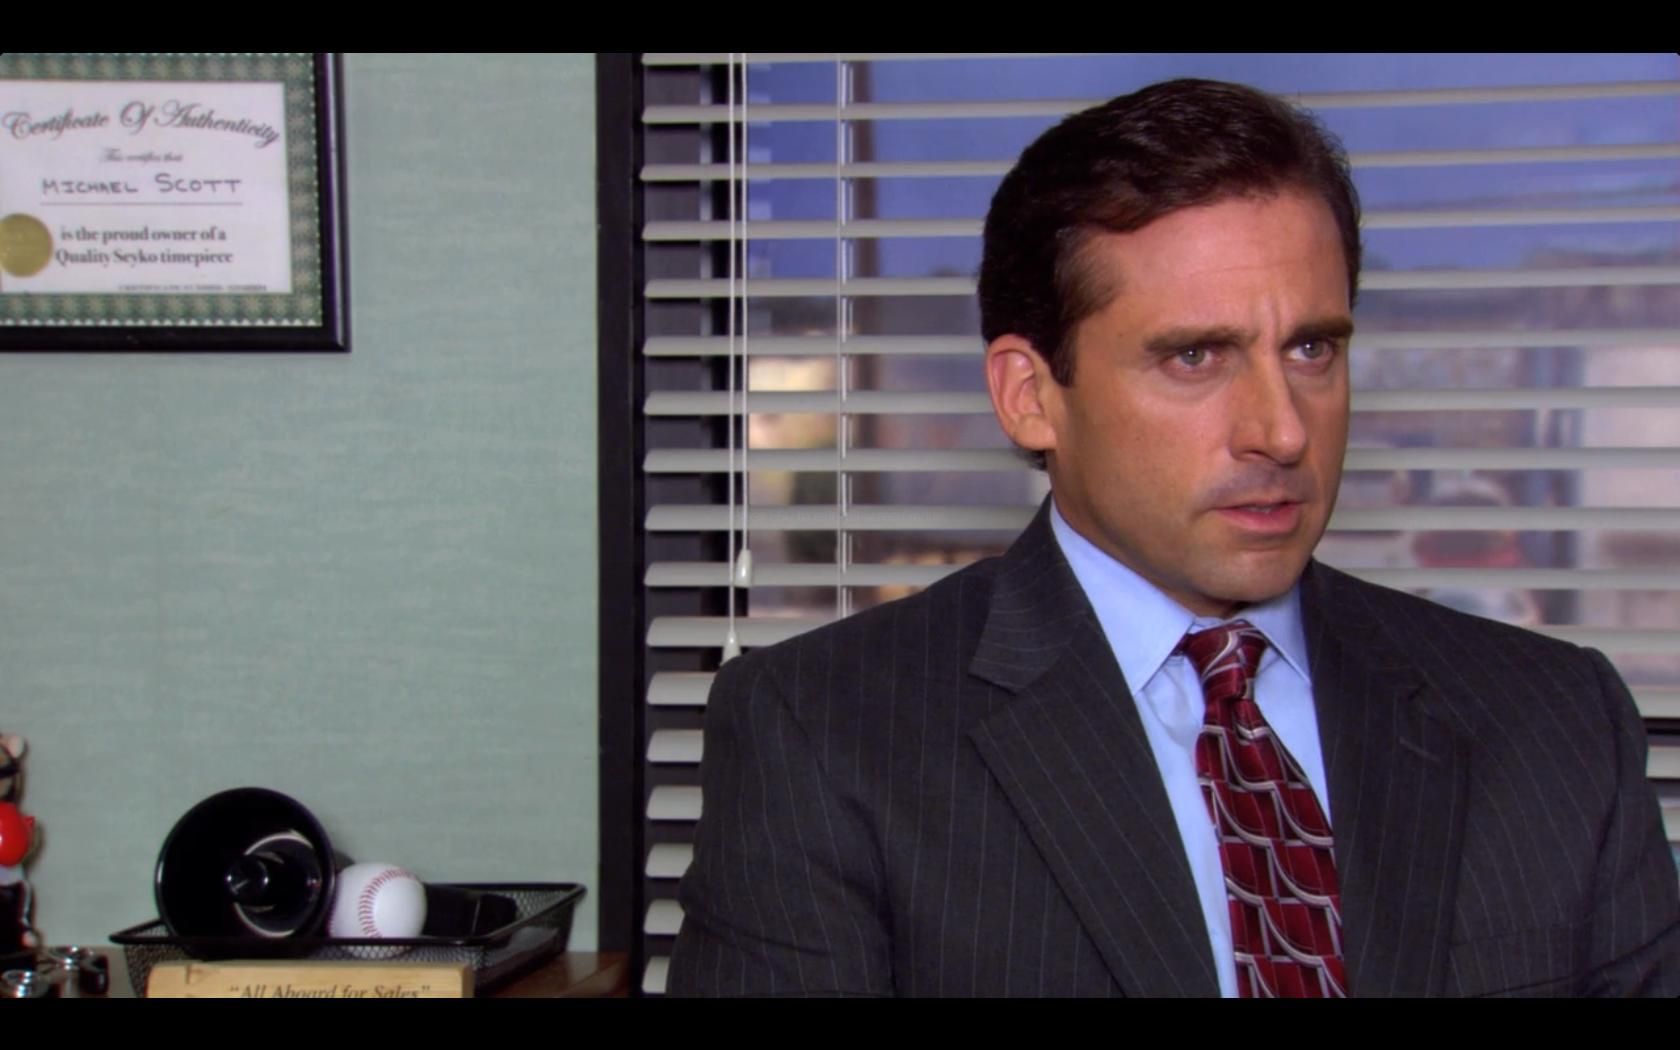 Just noticed Michael Scott's diploma on the wall